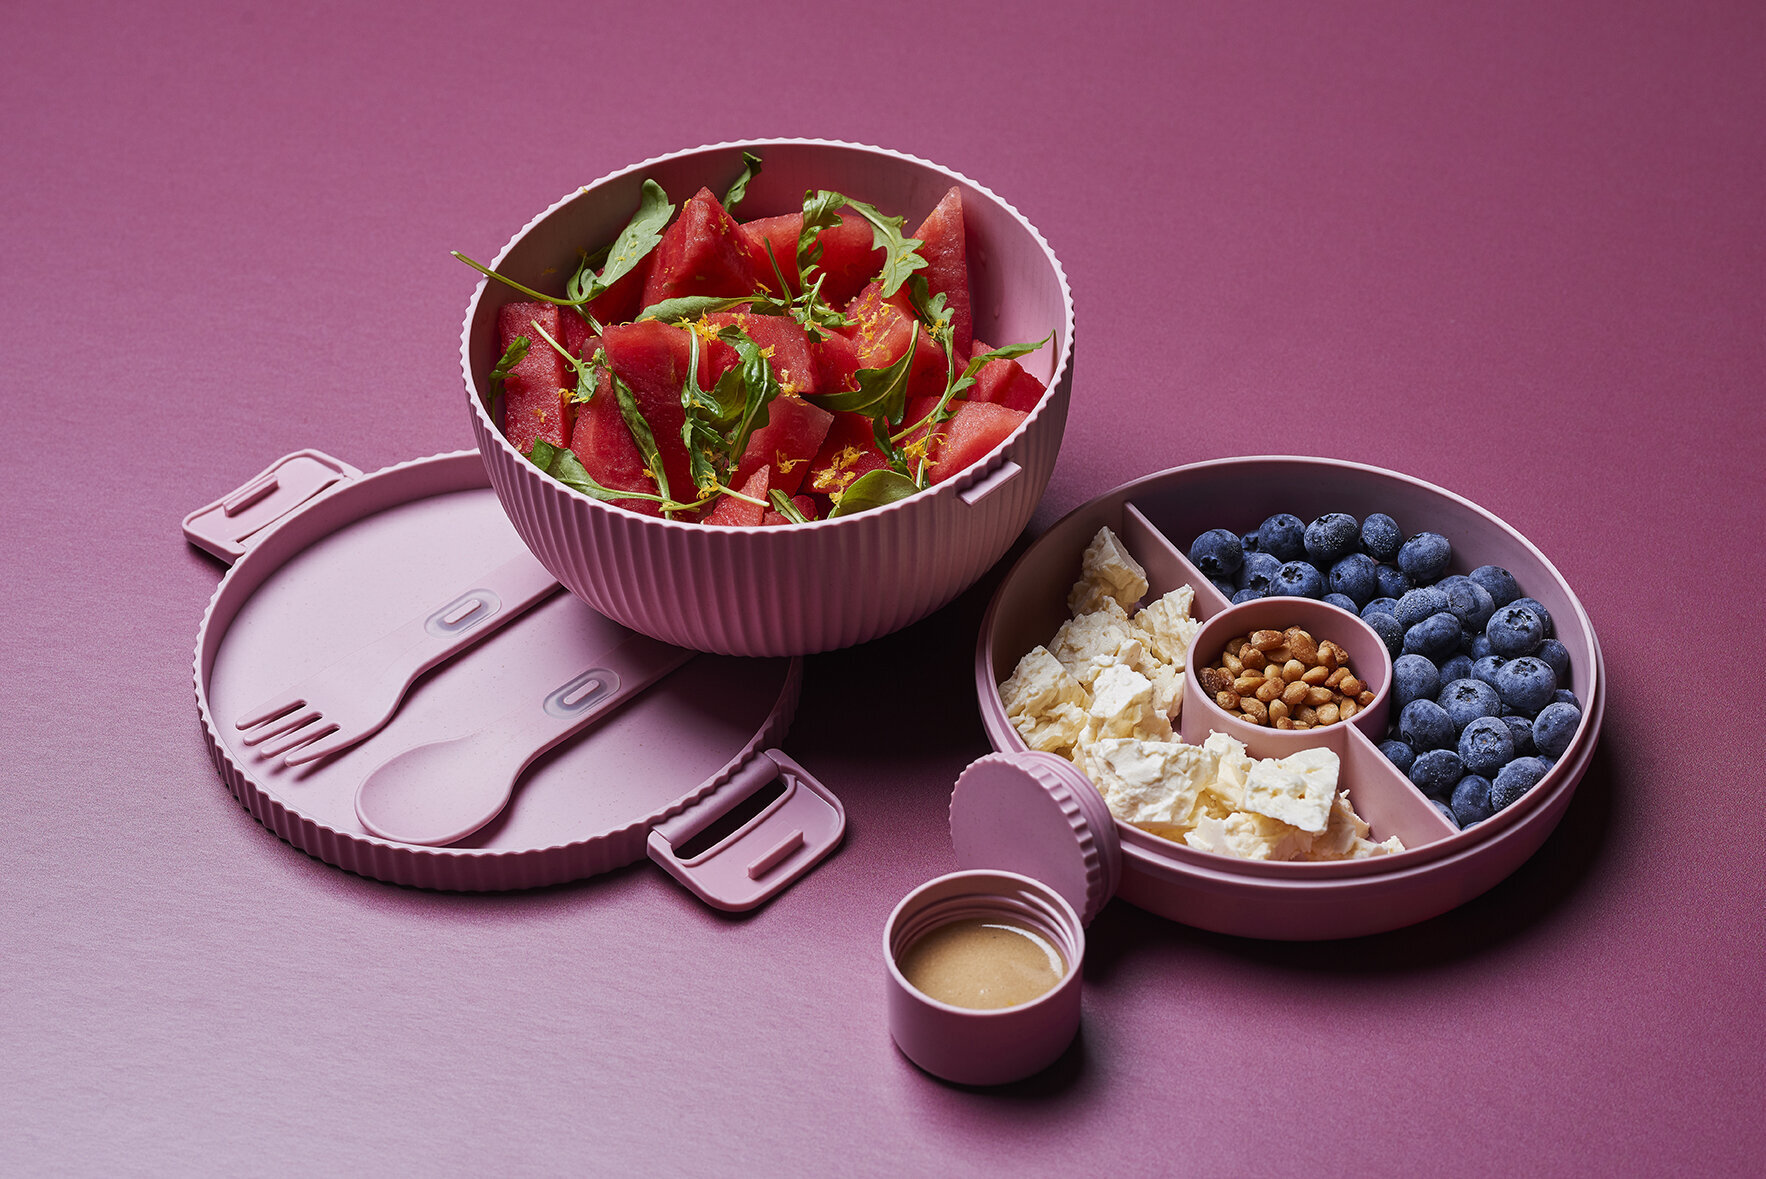 Set repas complet dusty rose